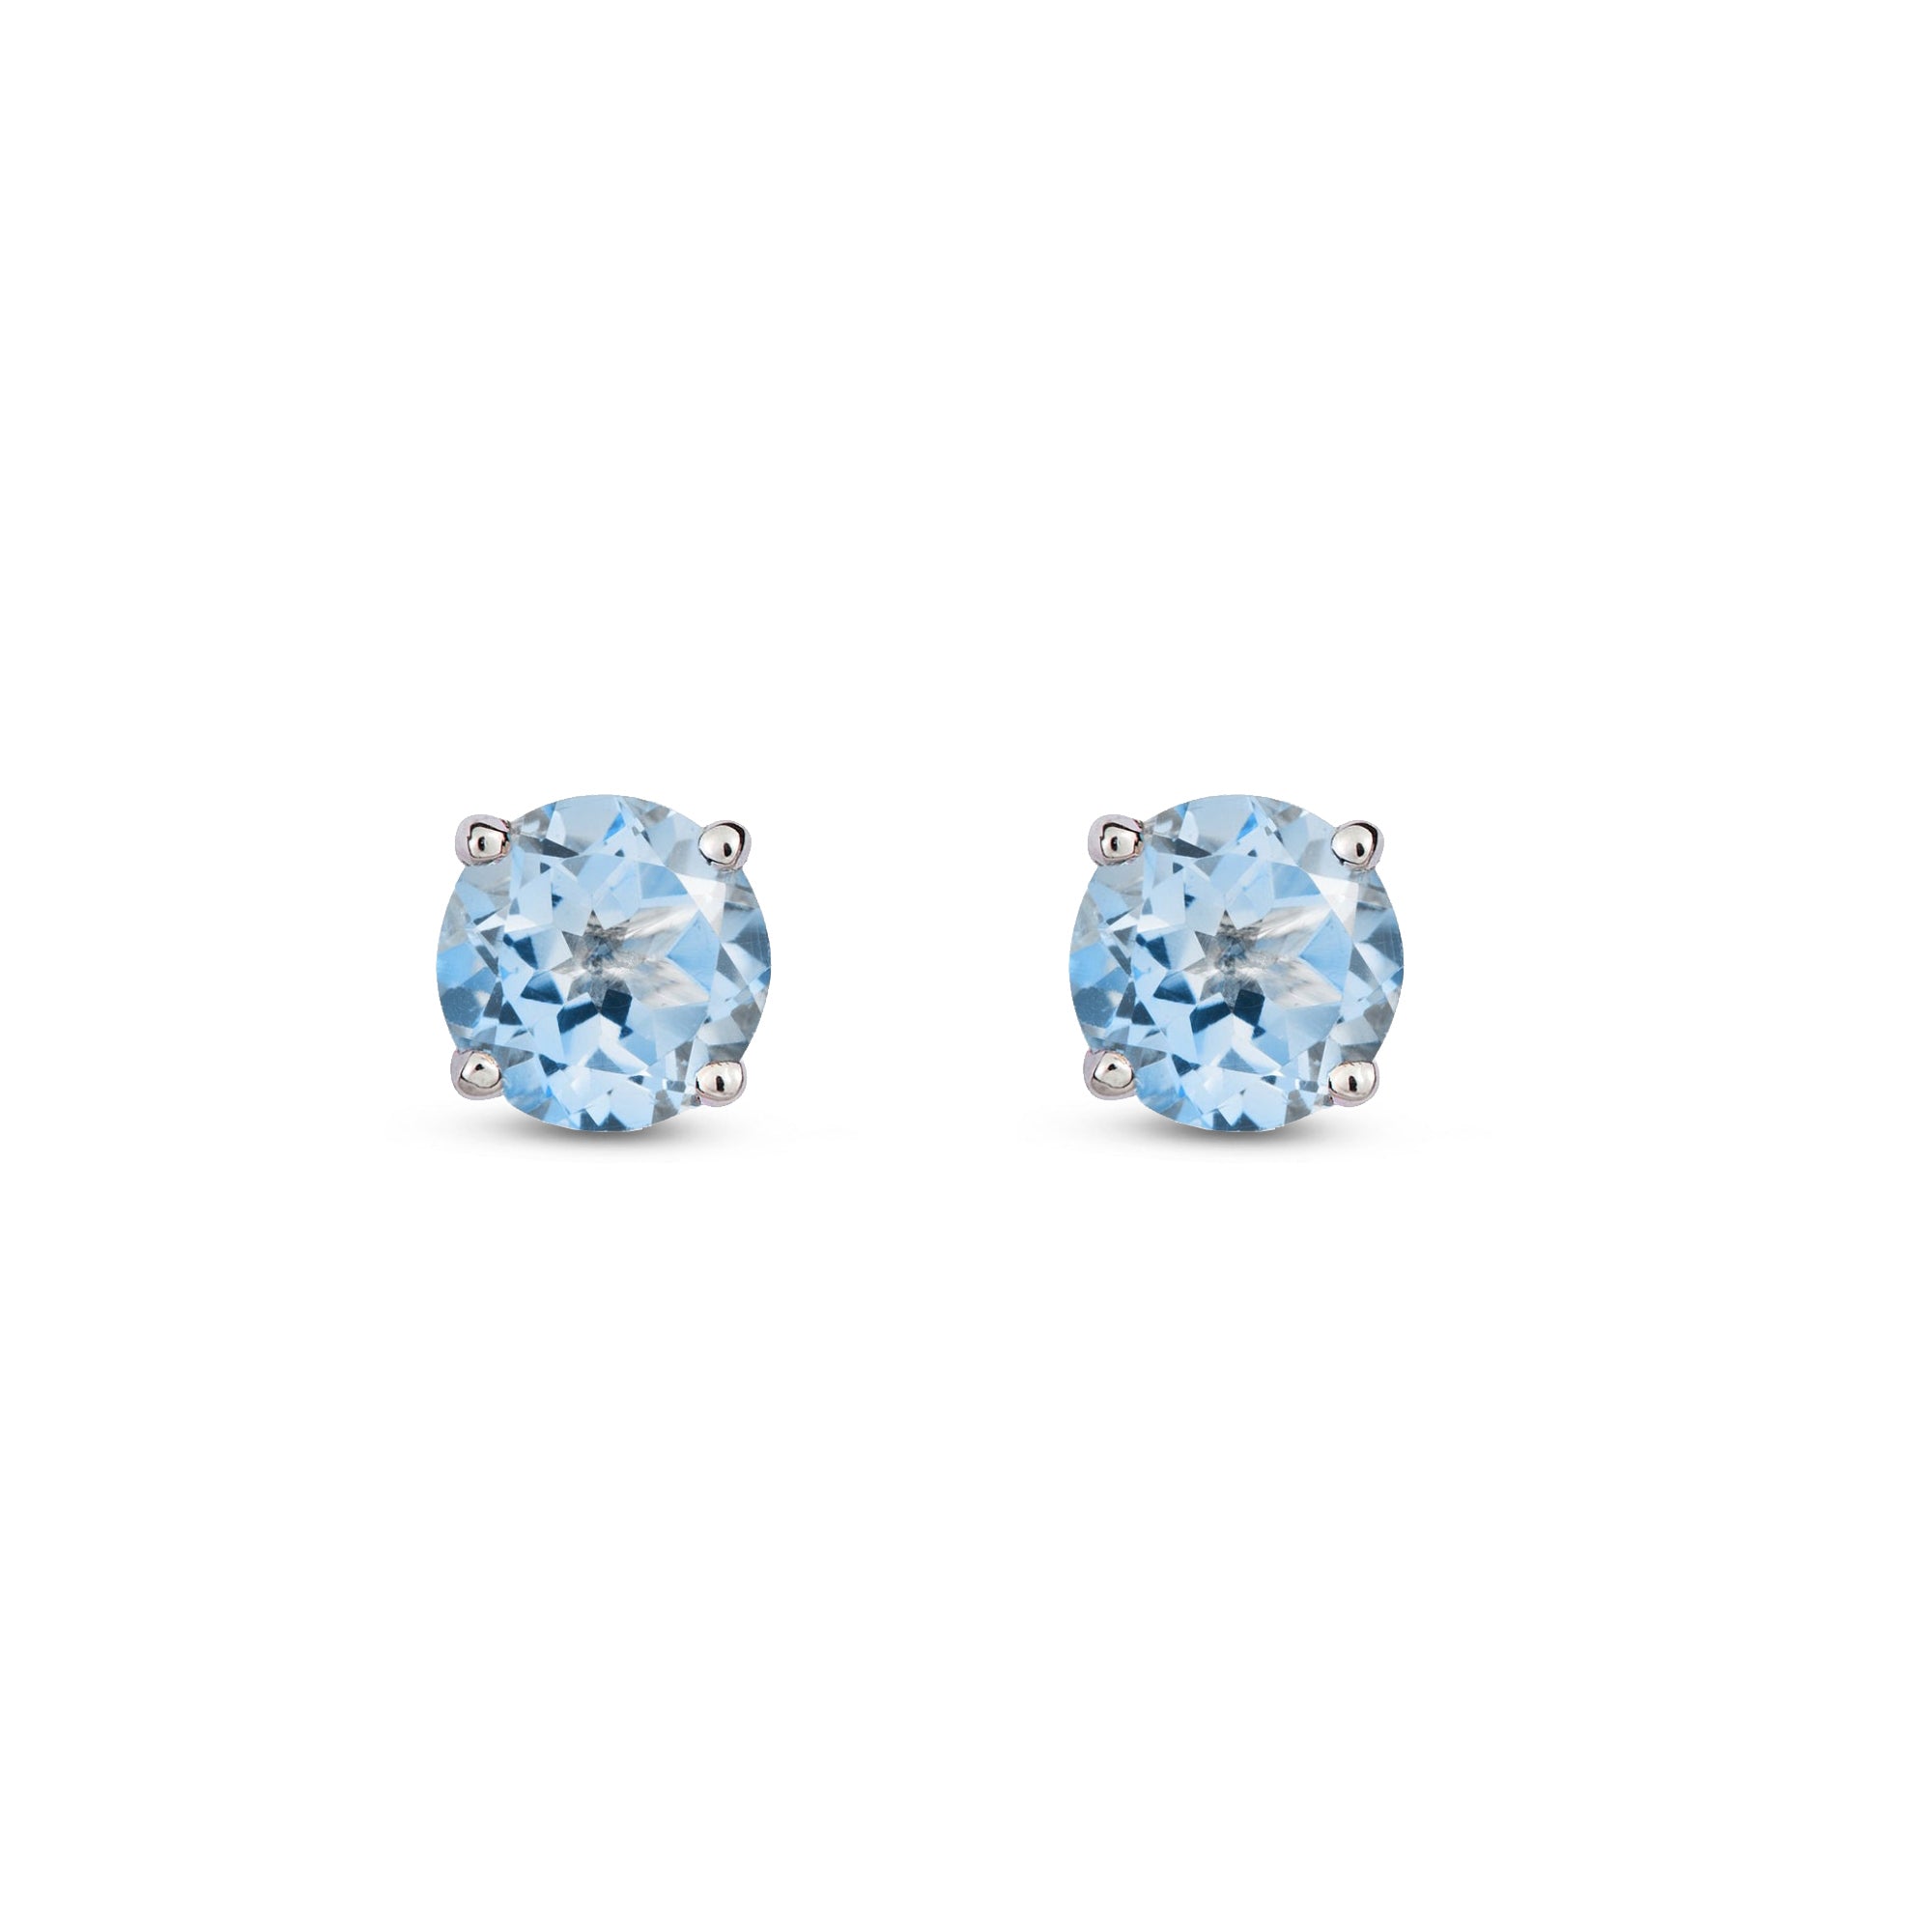 9ct White Gold 5mm Aquamarine Four Claw Round Stud Earrings